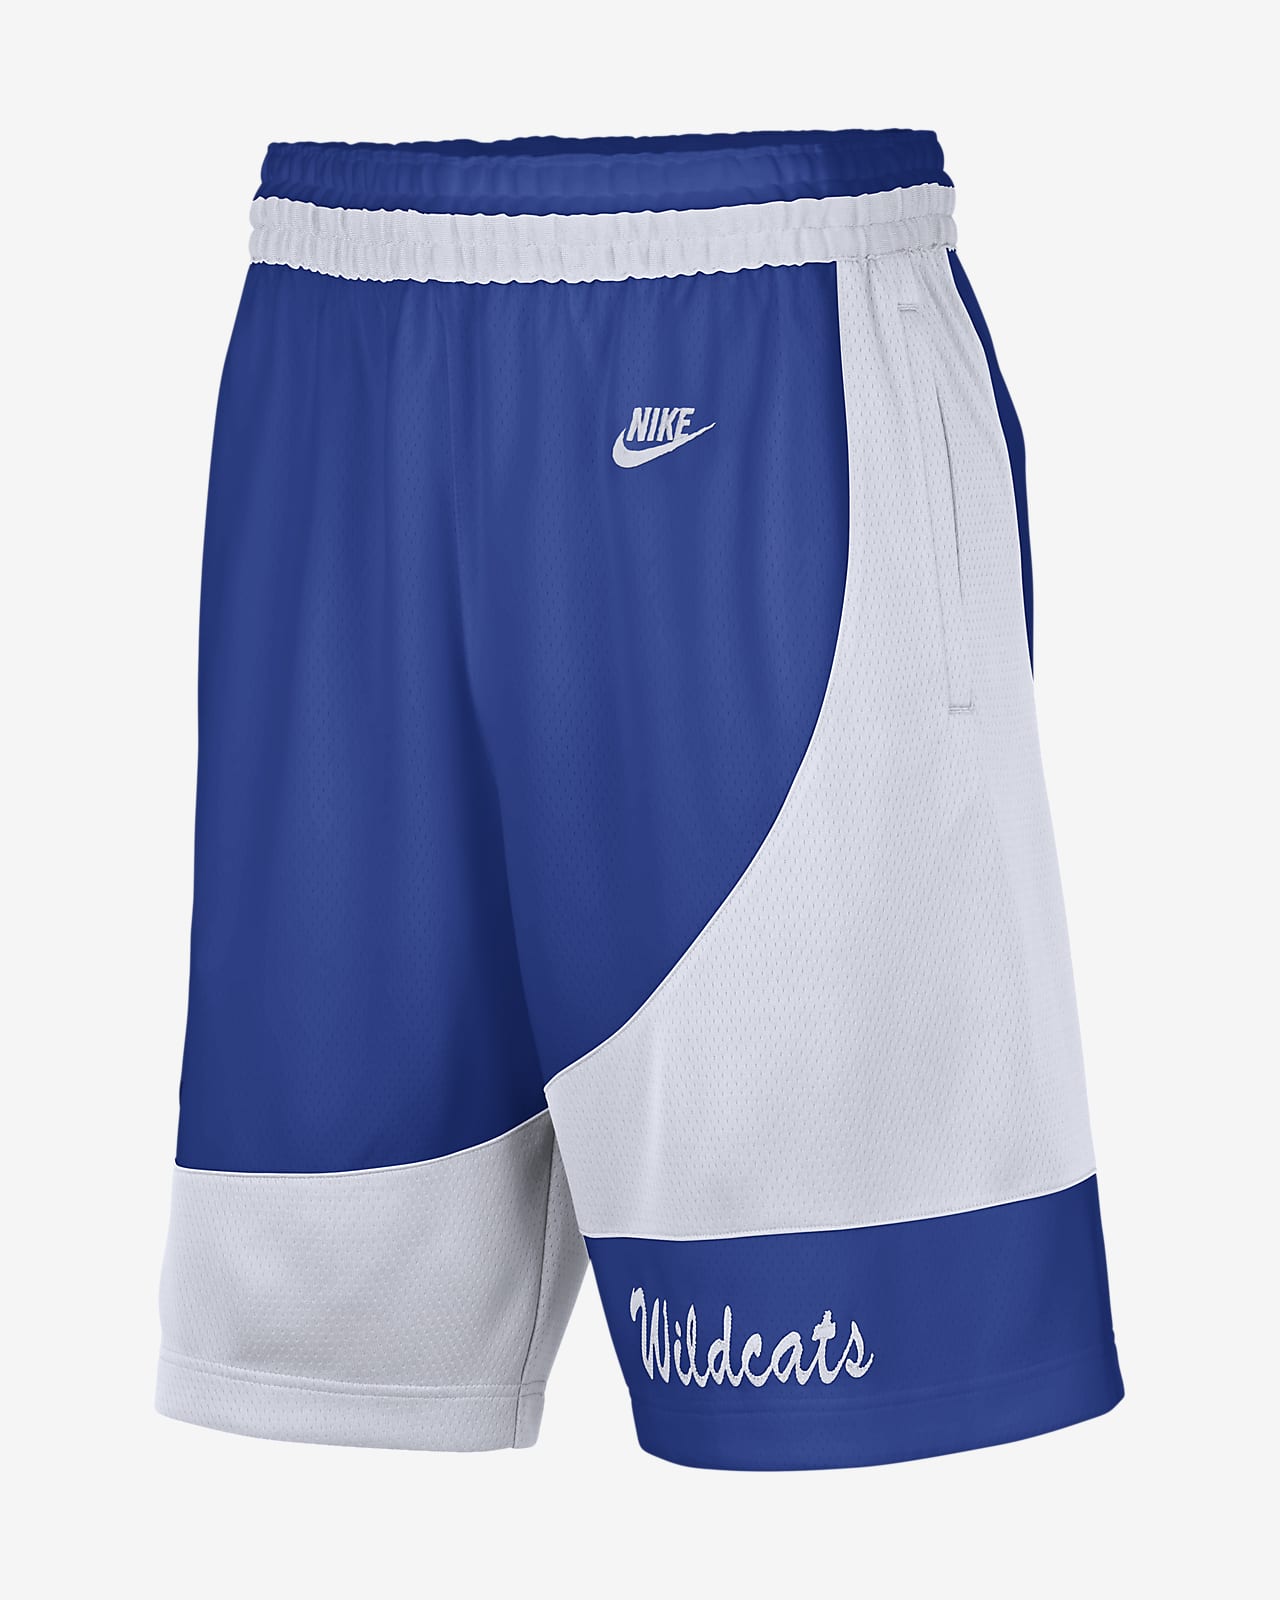 Kentucky Limited Men's Nike Dri-FIT College Basketball Shorts